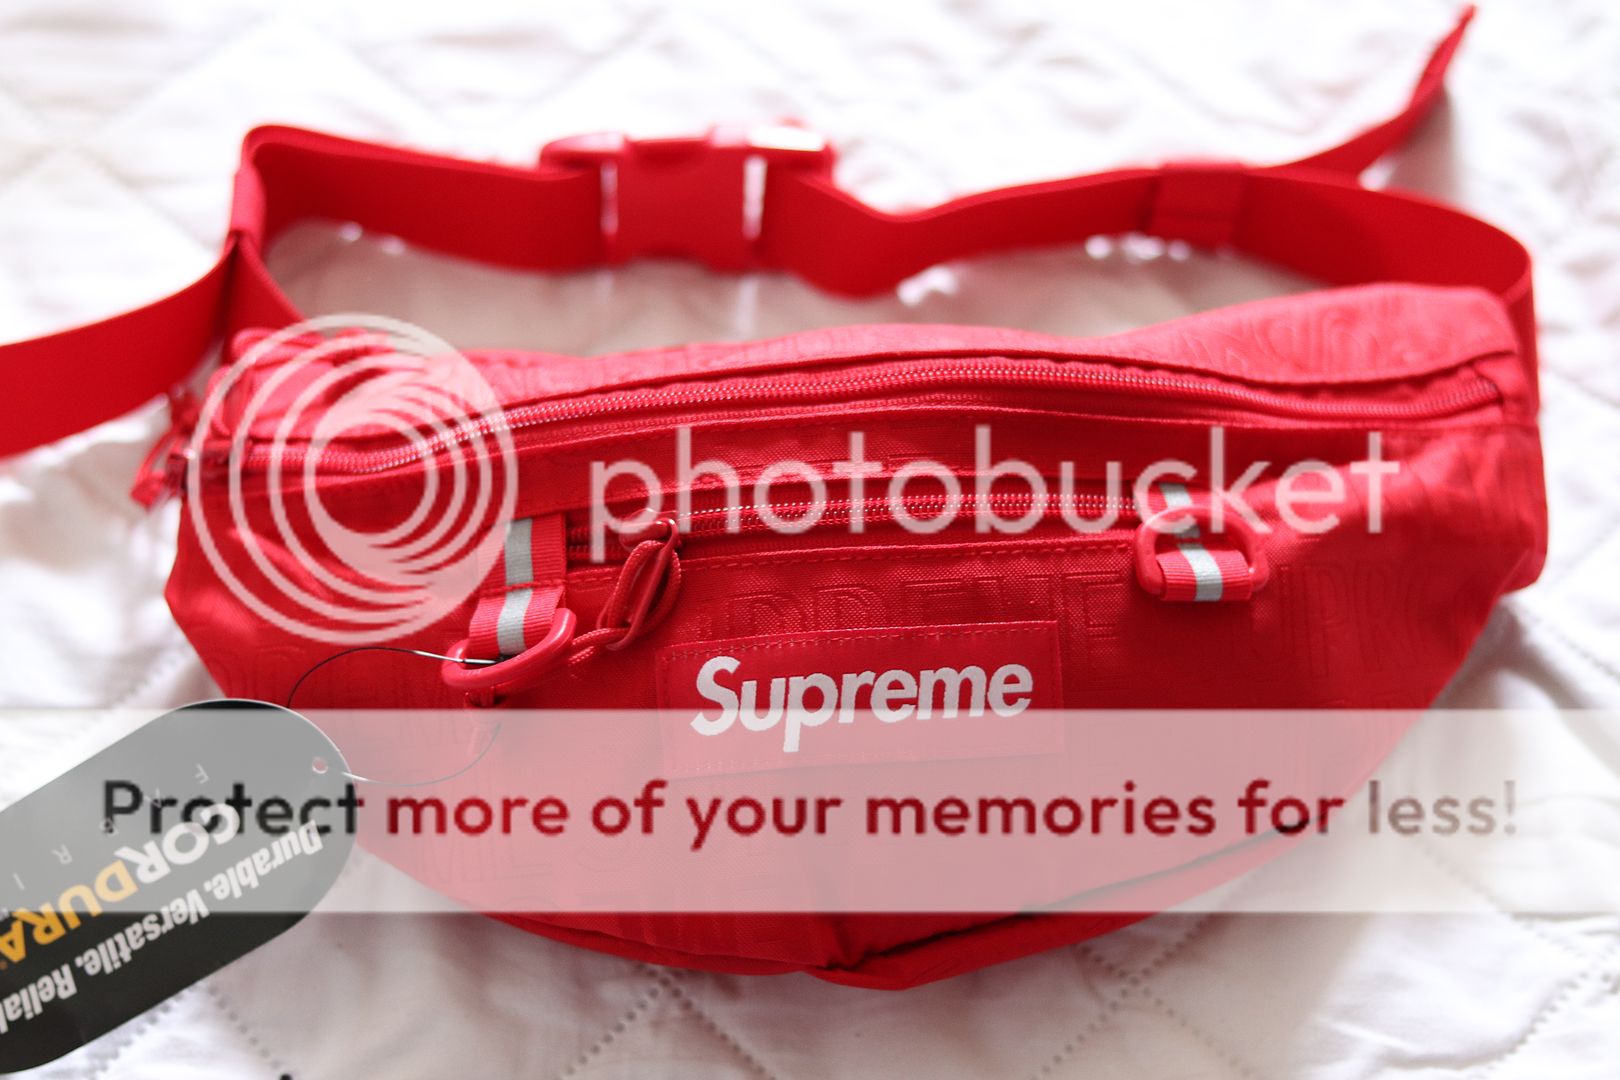 Supreme Waist Bag Red One Size 100% Authentic SS19 Summer 2019 Festival Bum | eBay